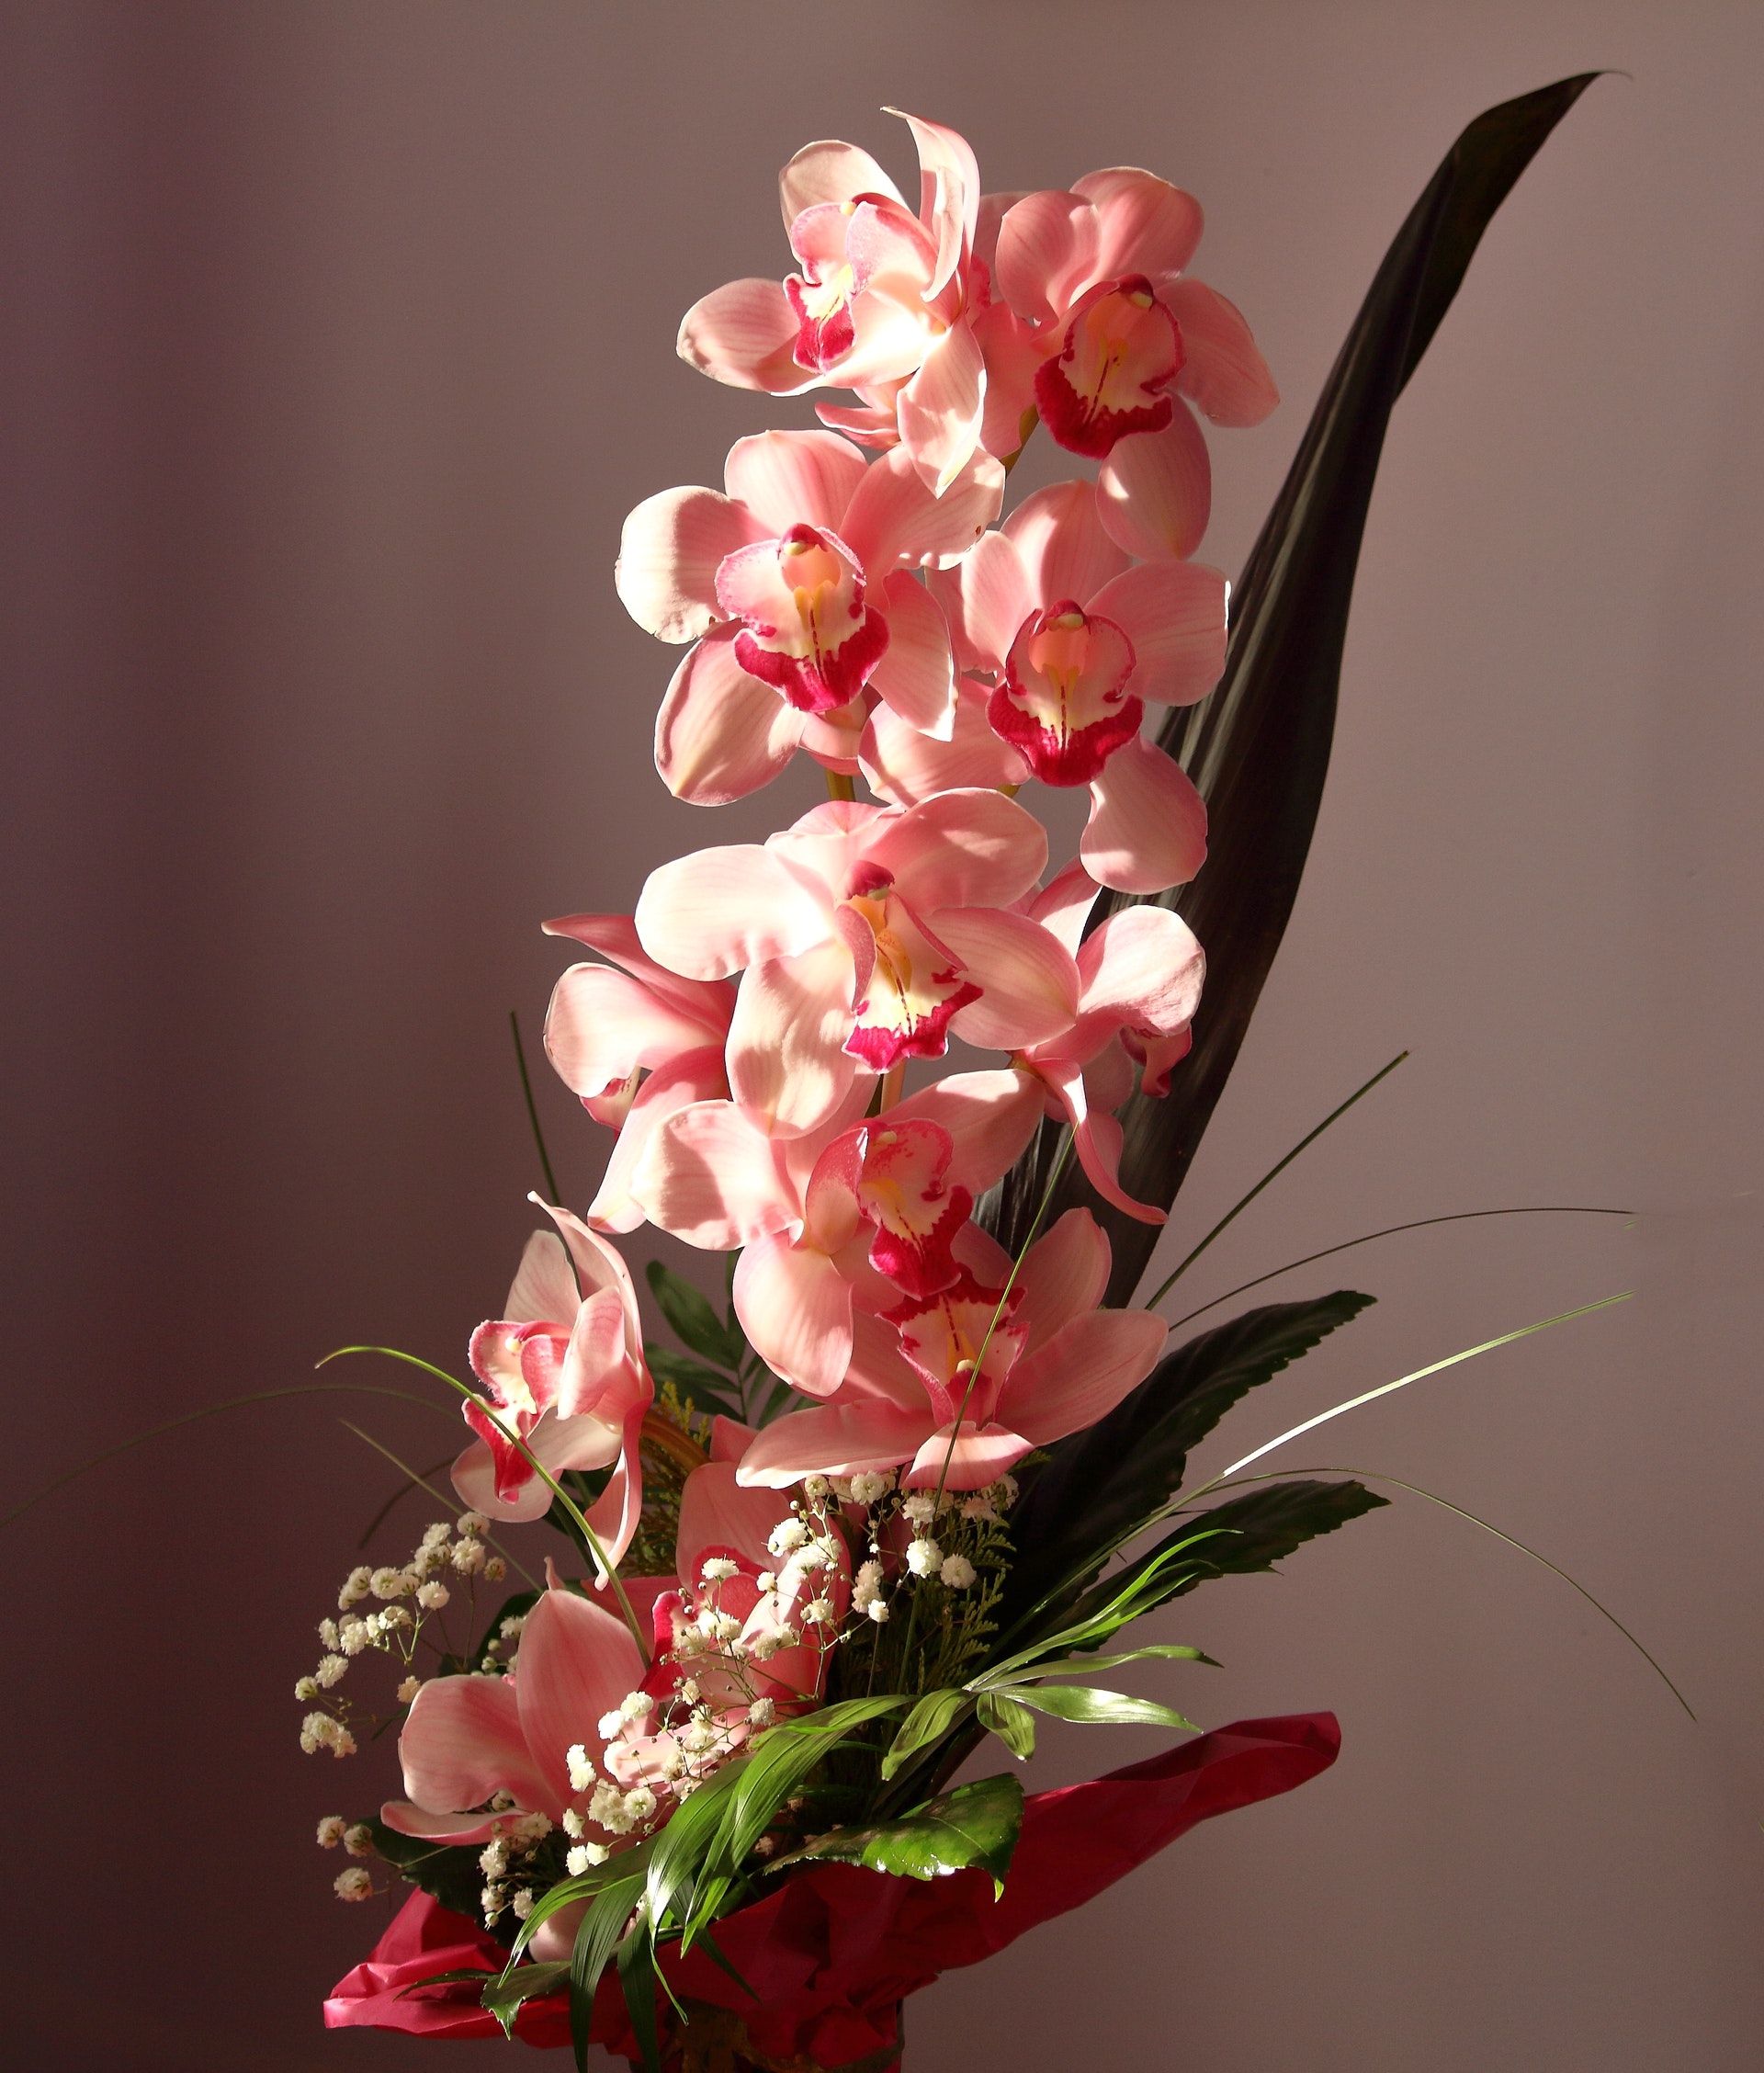 Incredible Yet Unexpected Health Benefits of Orchids